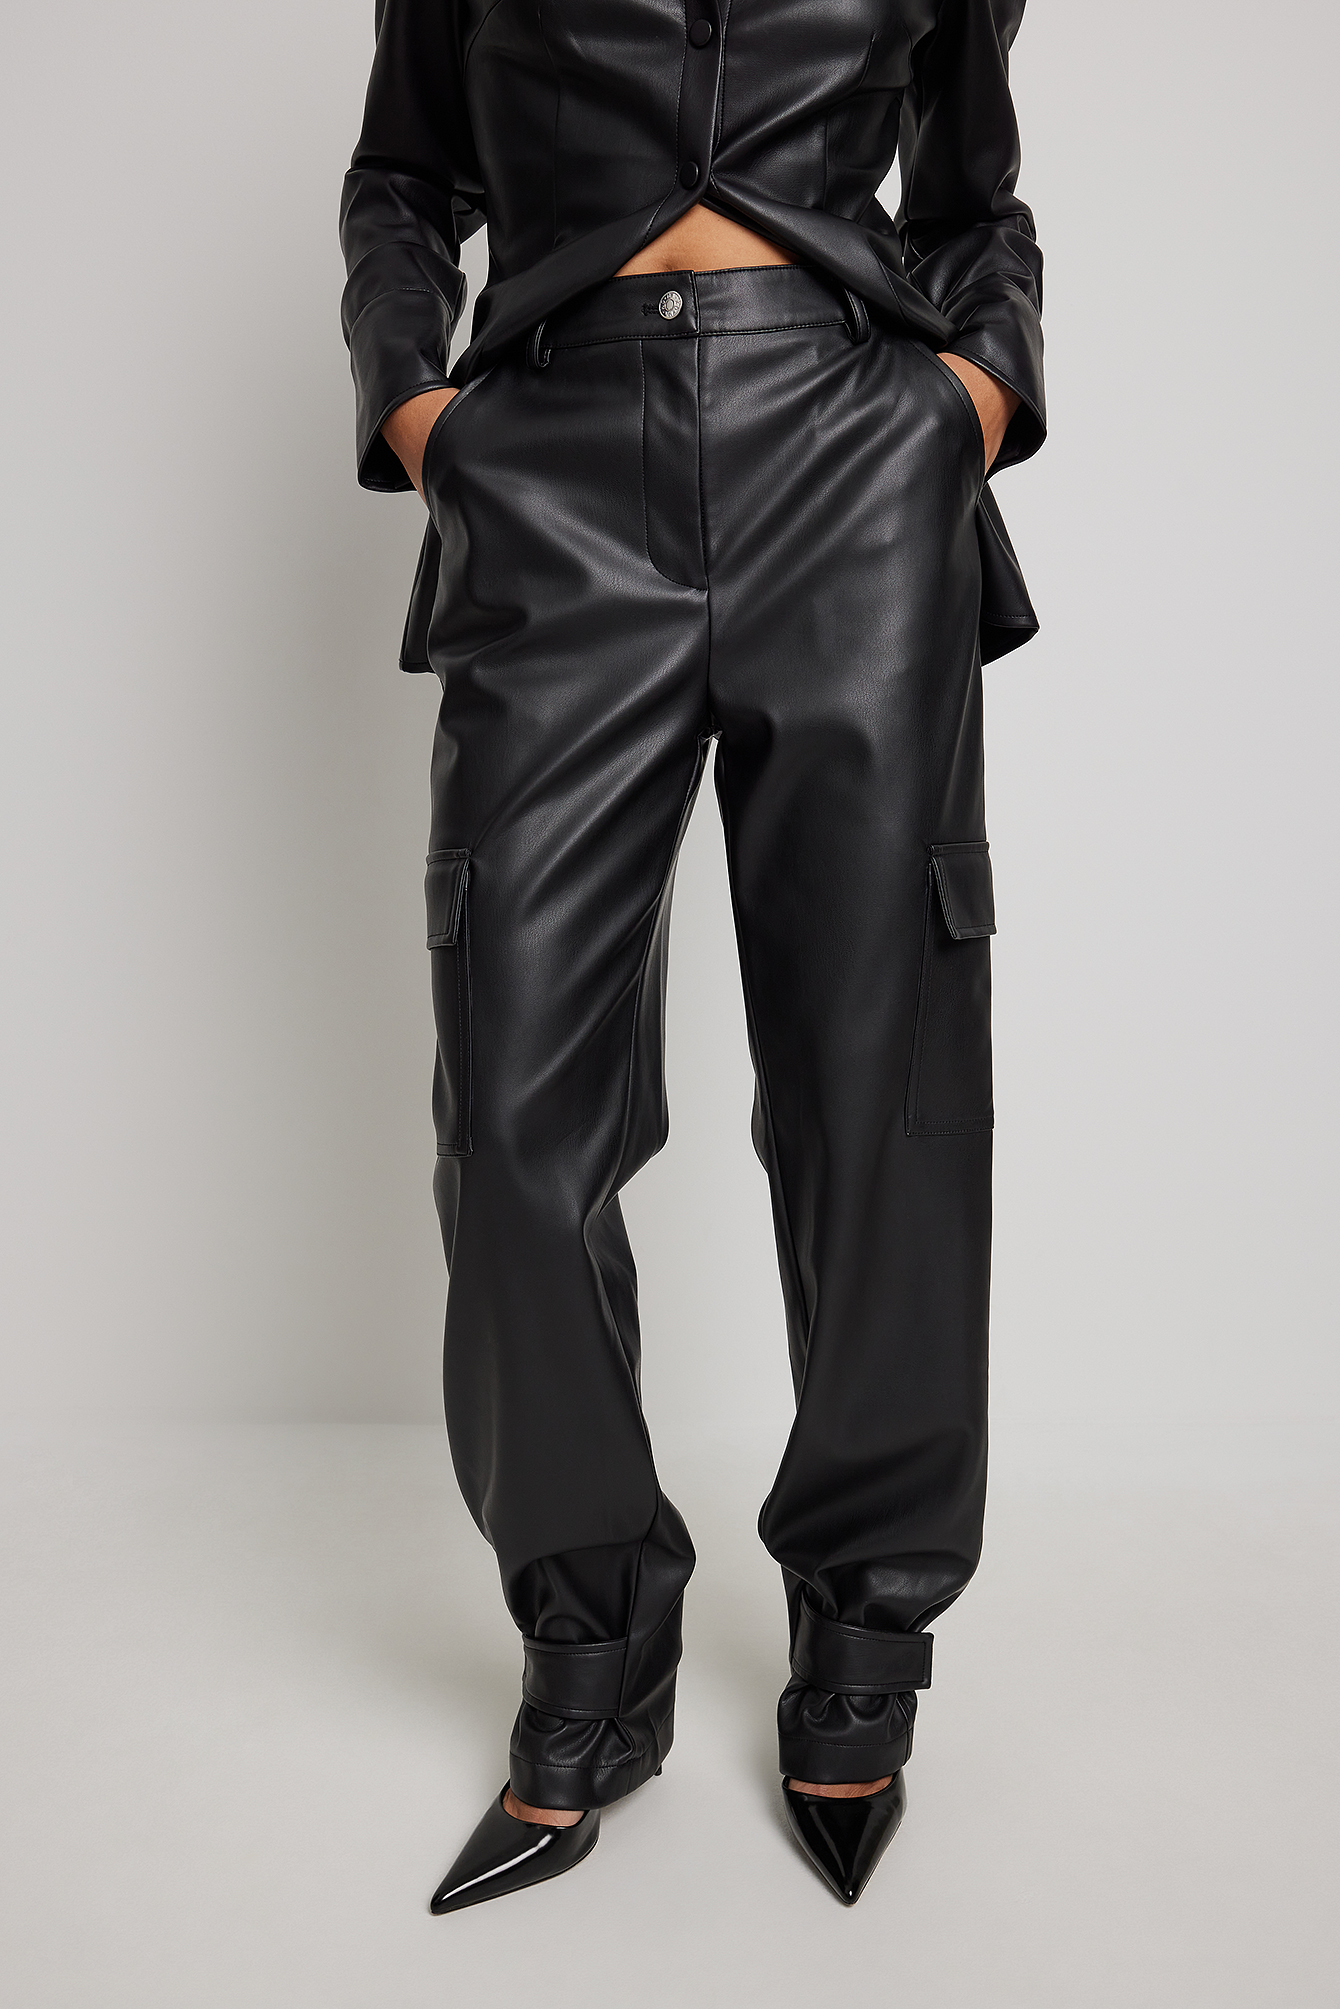 Cherry Koko Scout Faux Leather Cargo Trousers in Black  iCLOTHING   iCLOTHING